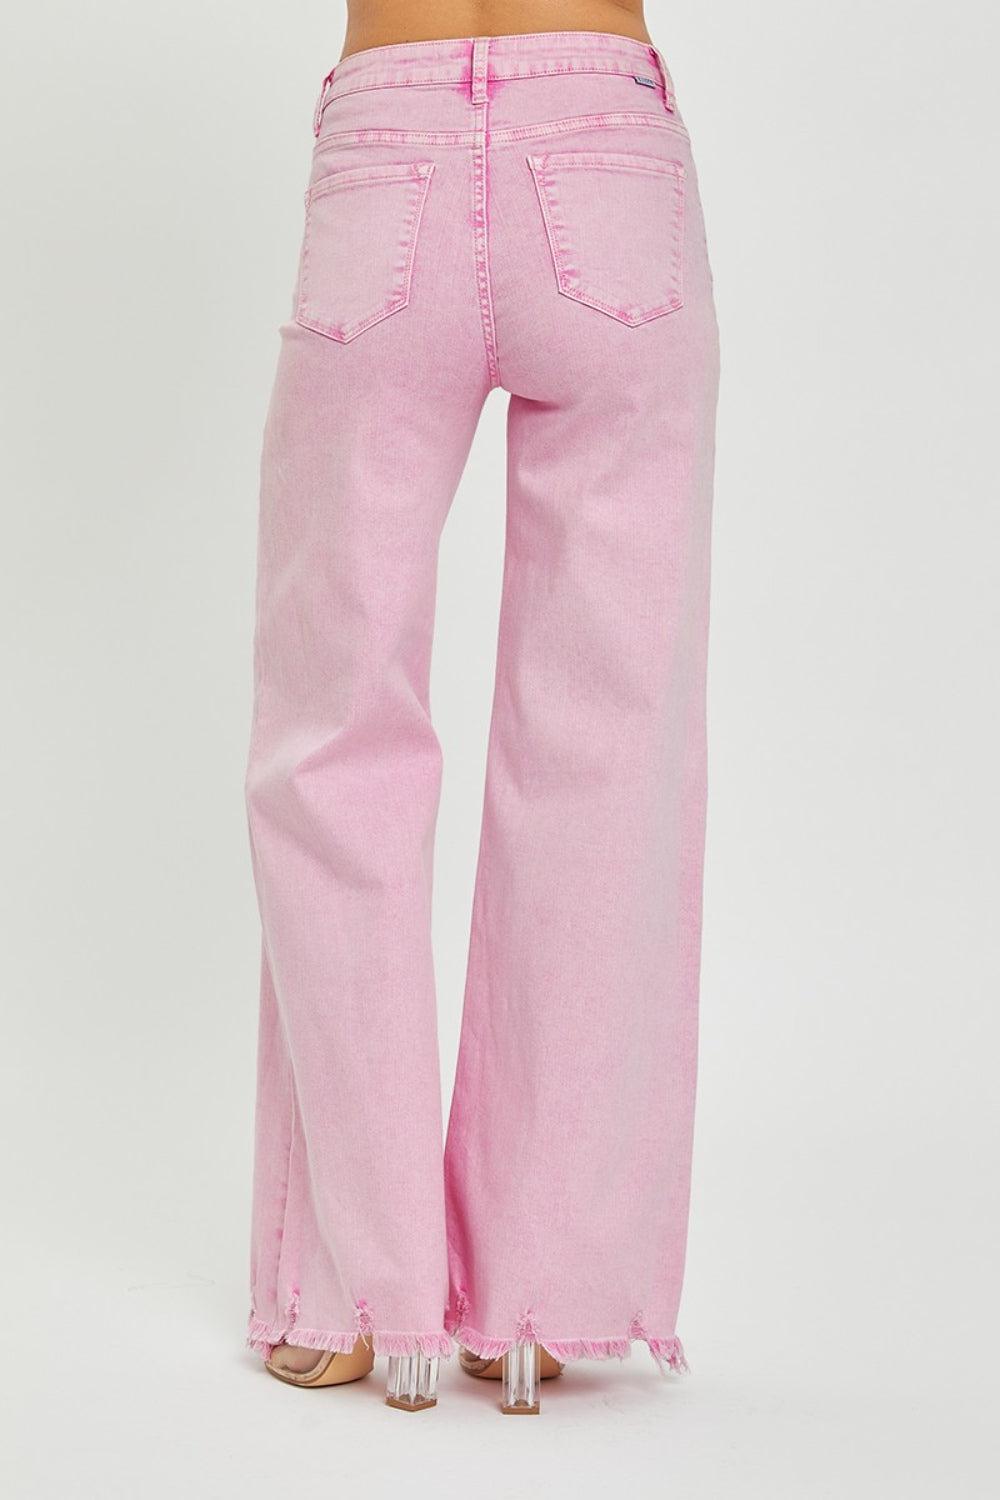 a woman is wearing pink jeans and heels